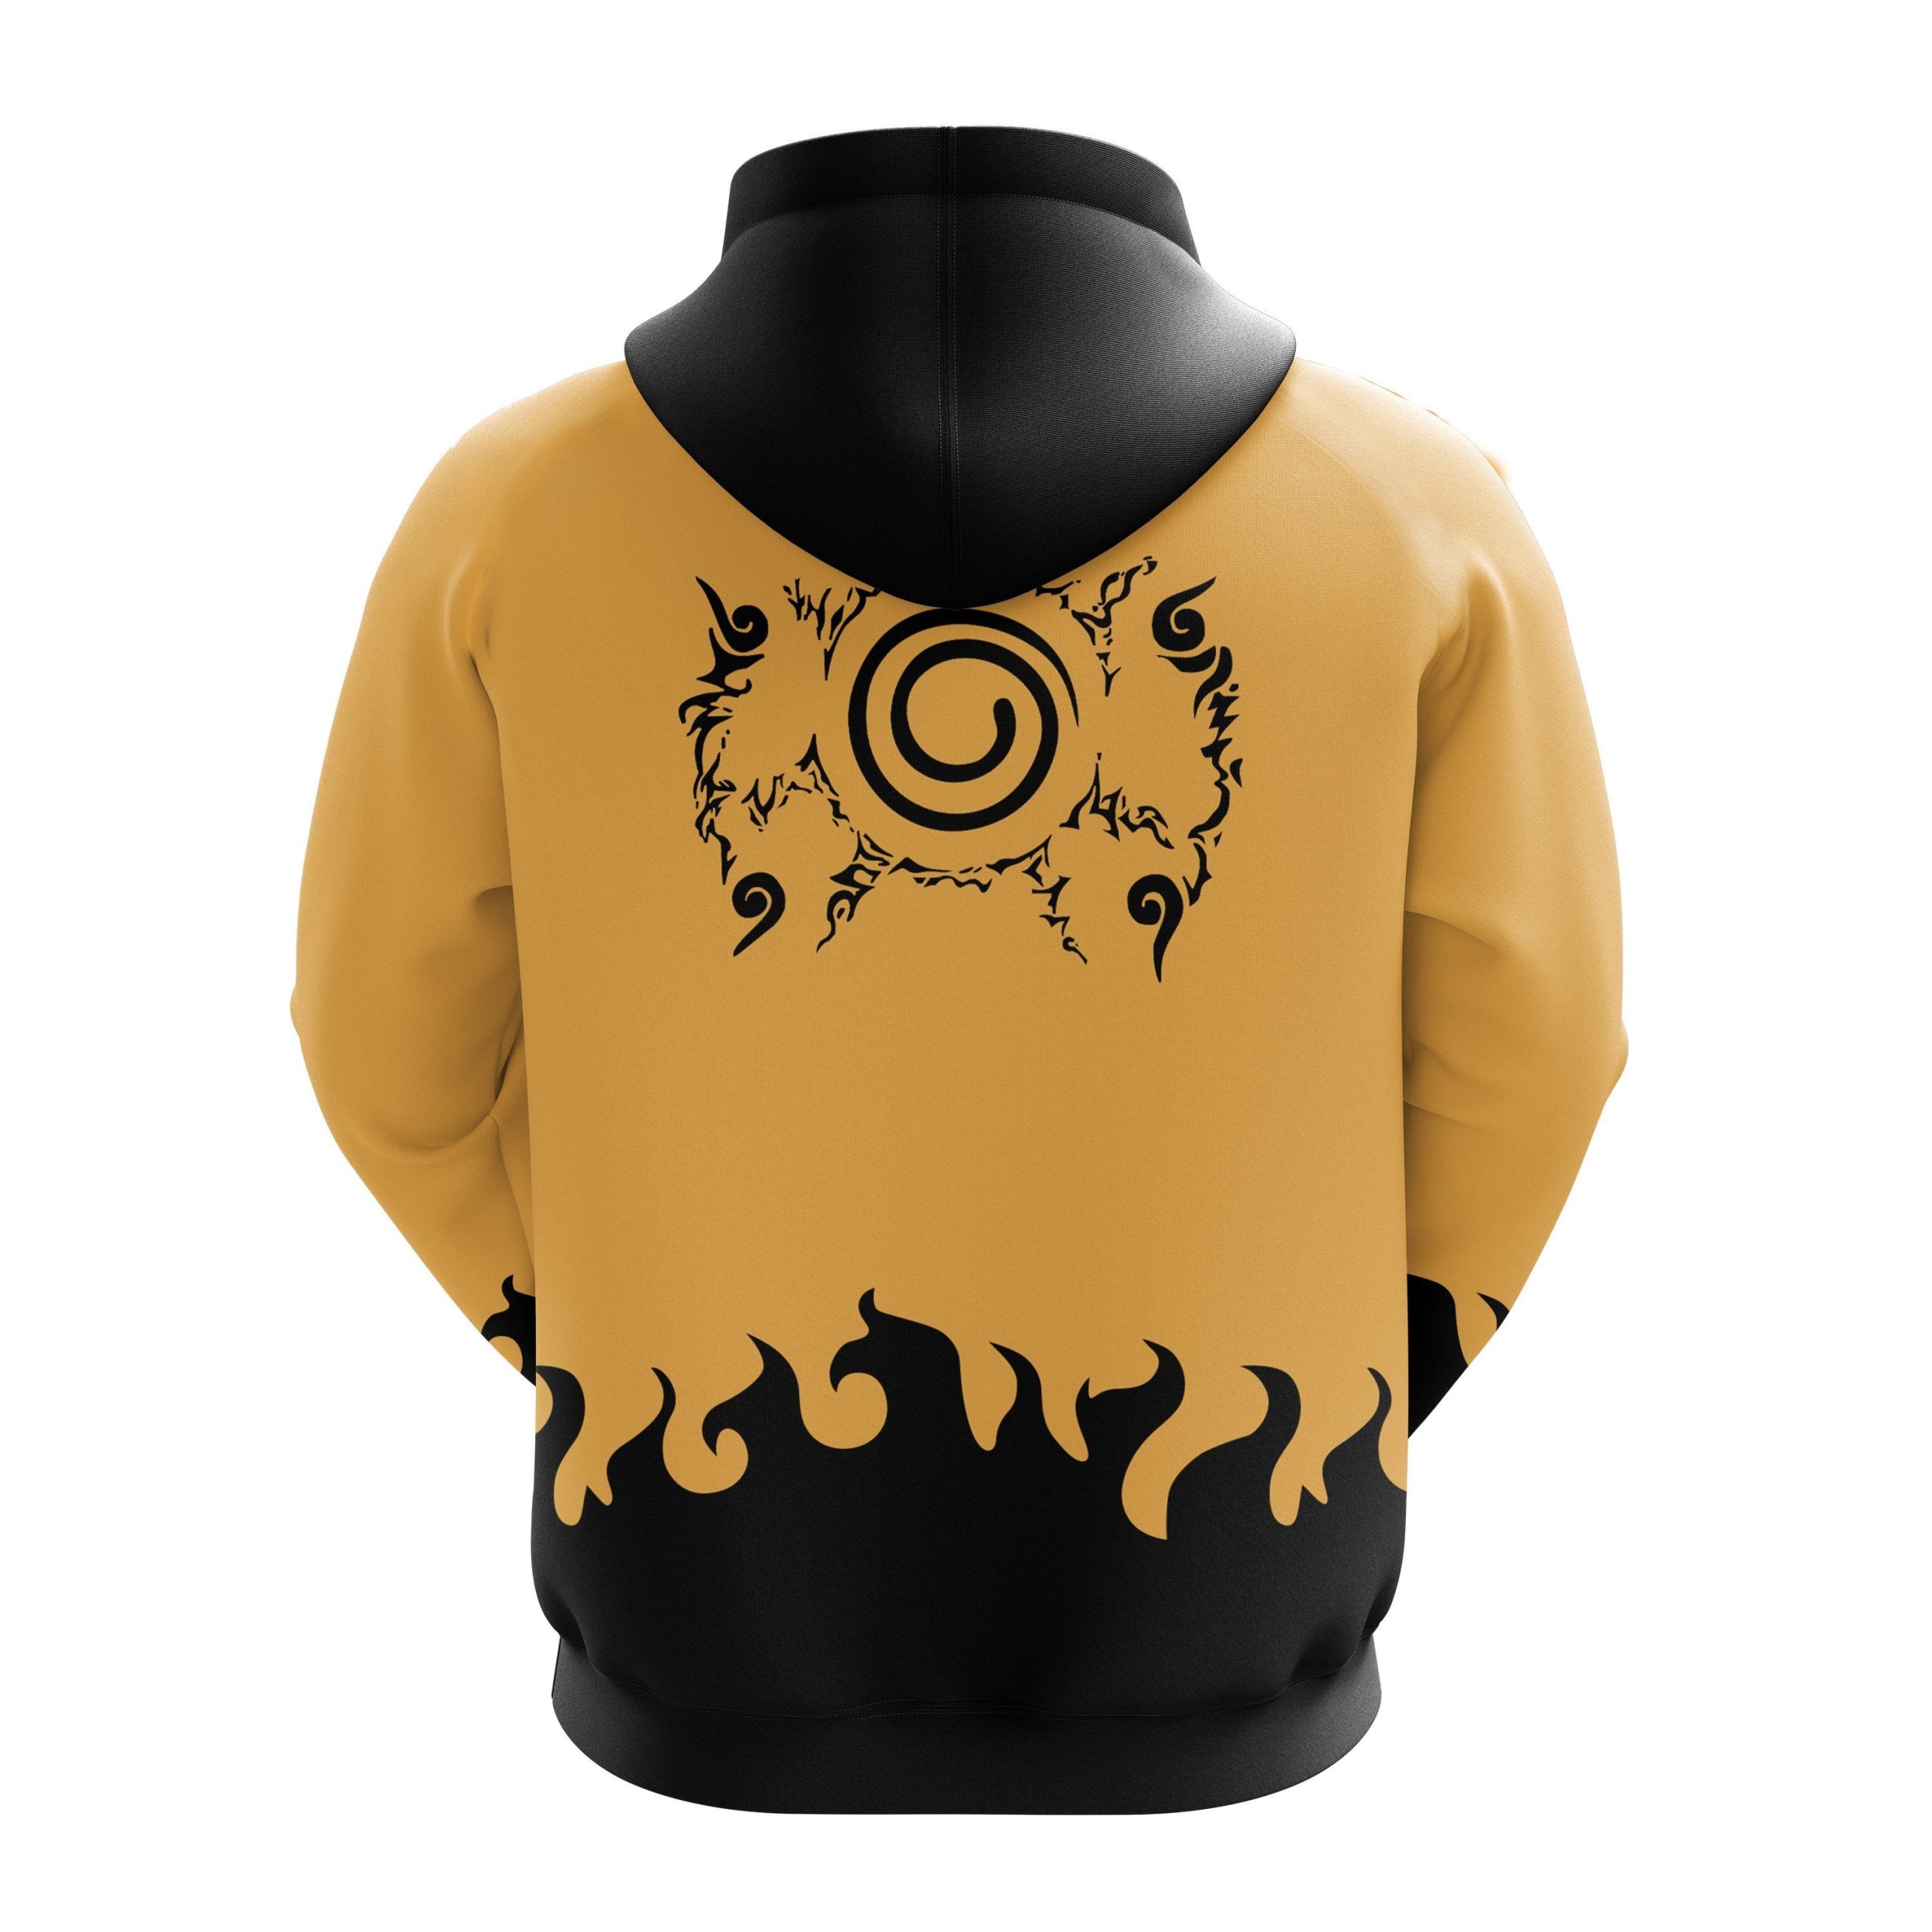 Naruto Outfit Cosplay Yellow Anime Hoodie Amazing Gift Idea